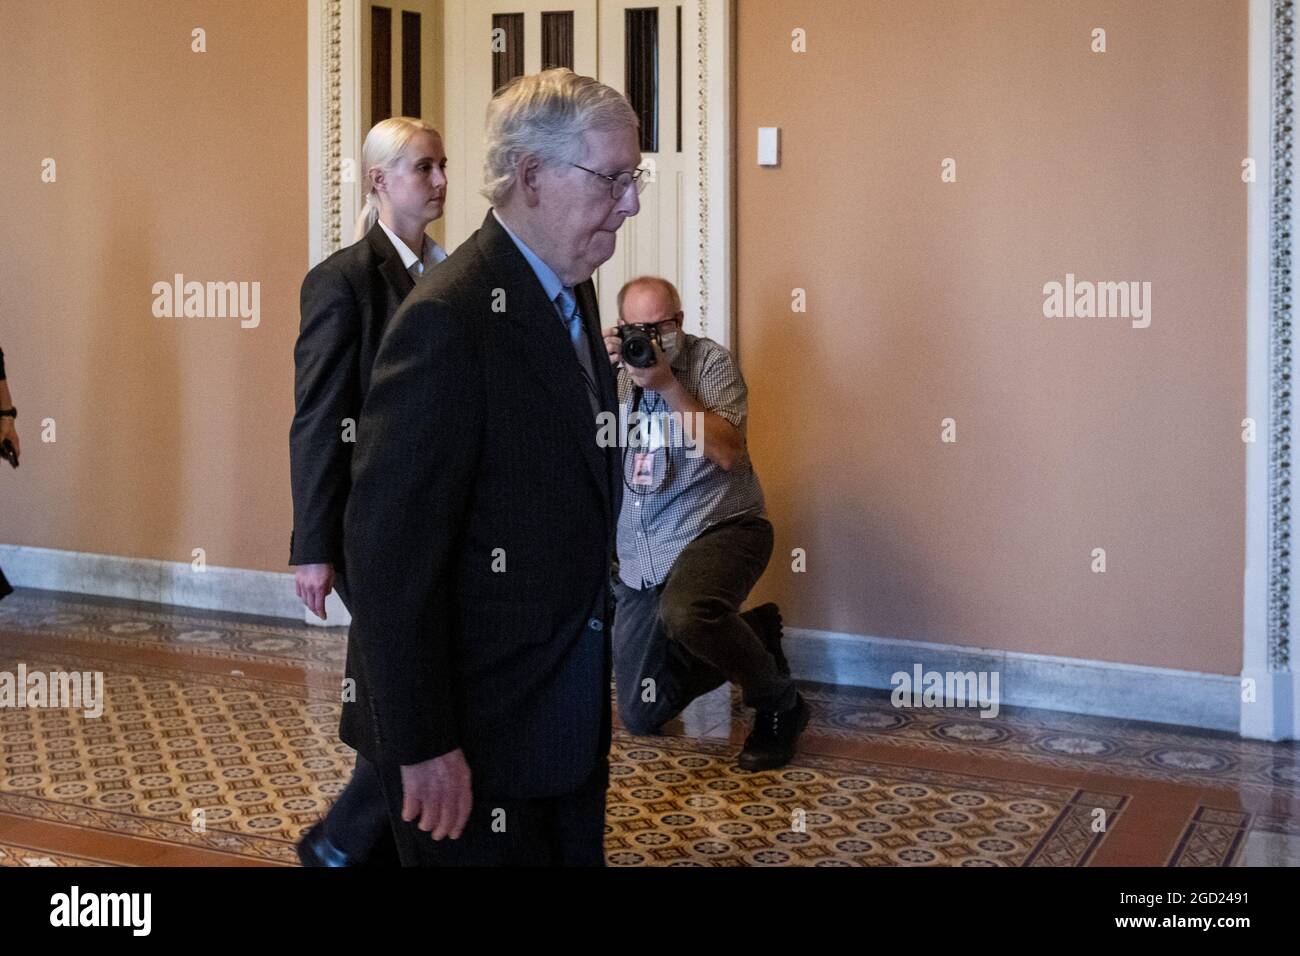 United States Senate Minority Leader Mitch McConnell (Republican of Kentucky) arrives at the US Capitol in Washington, DC, Tuesday, August 10, 2021. The Senate is expected to vote today on final passage of the bipartisan $1 trillion H.R. 3684, Infrastructure Investment and Jobs Act. Photo by Rod Lamkey / CNP/ABACAPRESS.COM Stock Photo